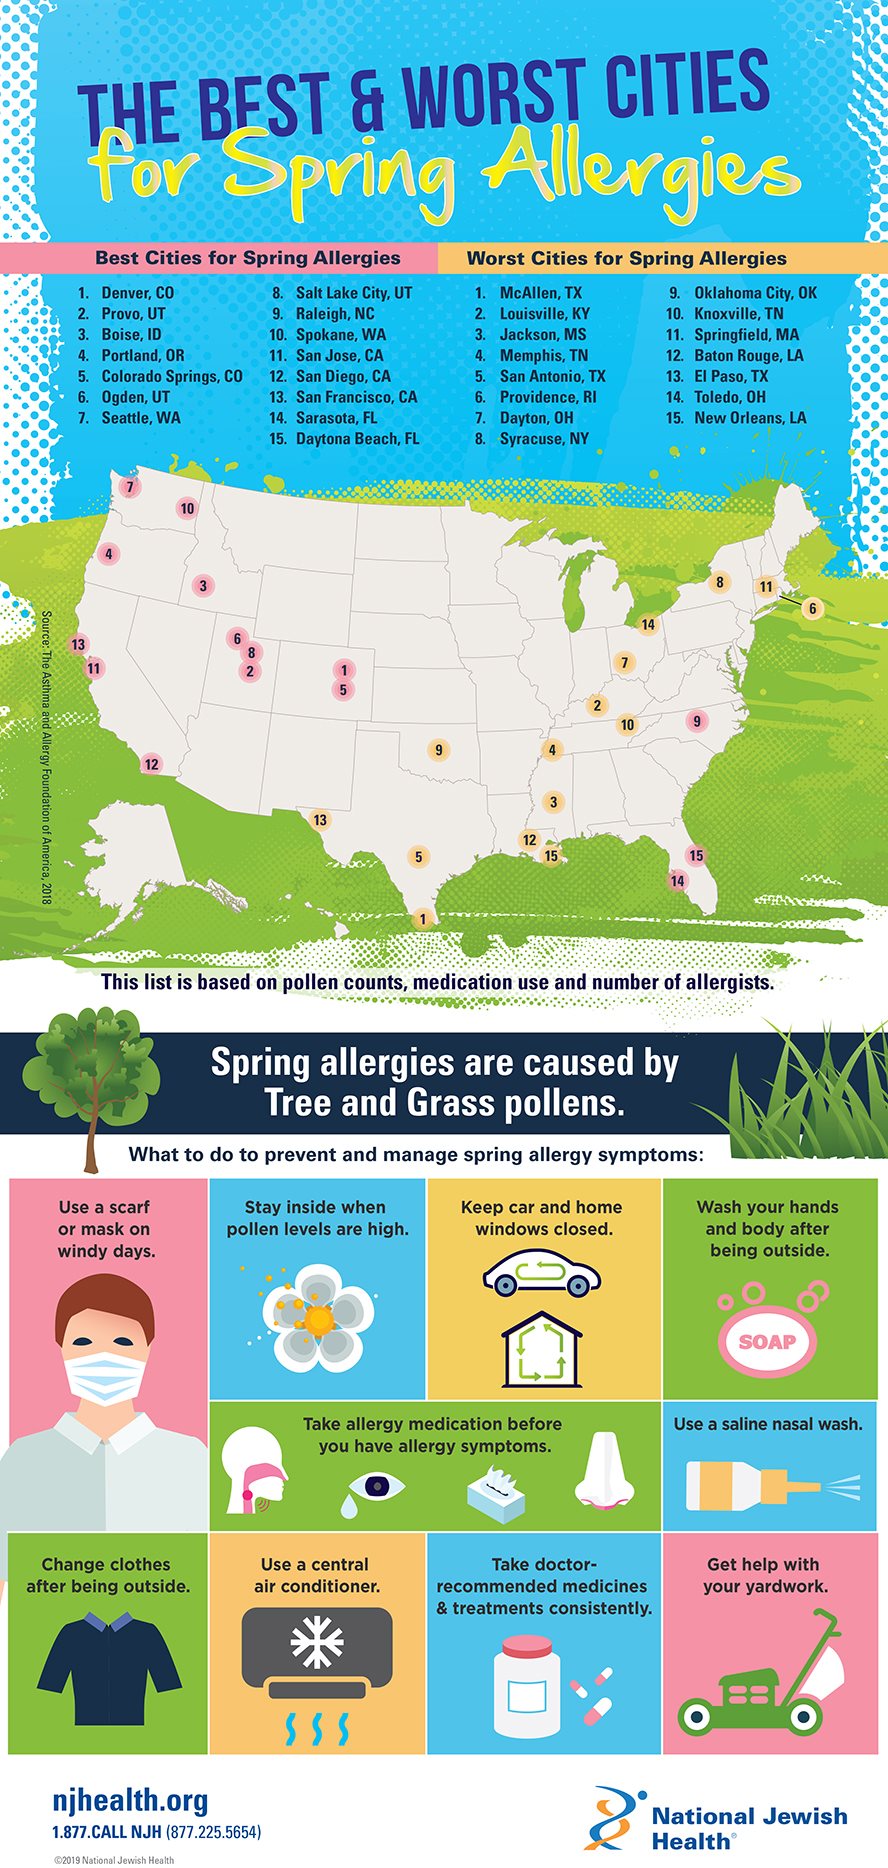 Best and Worst Cities for Spring Allergies